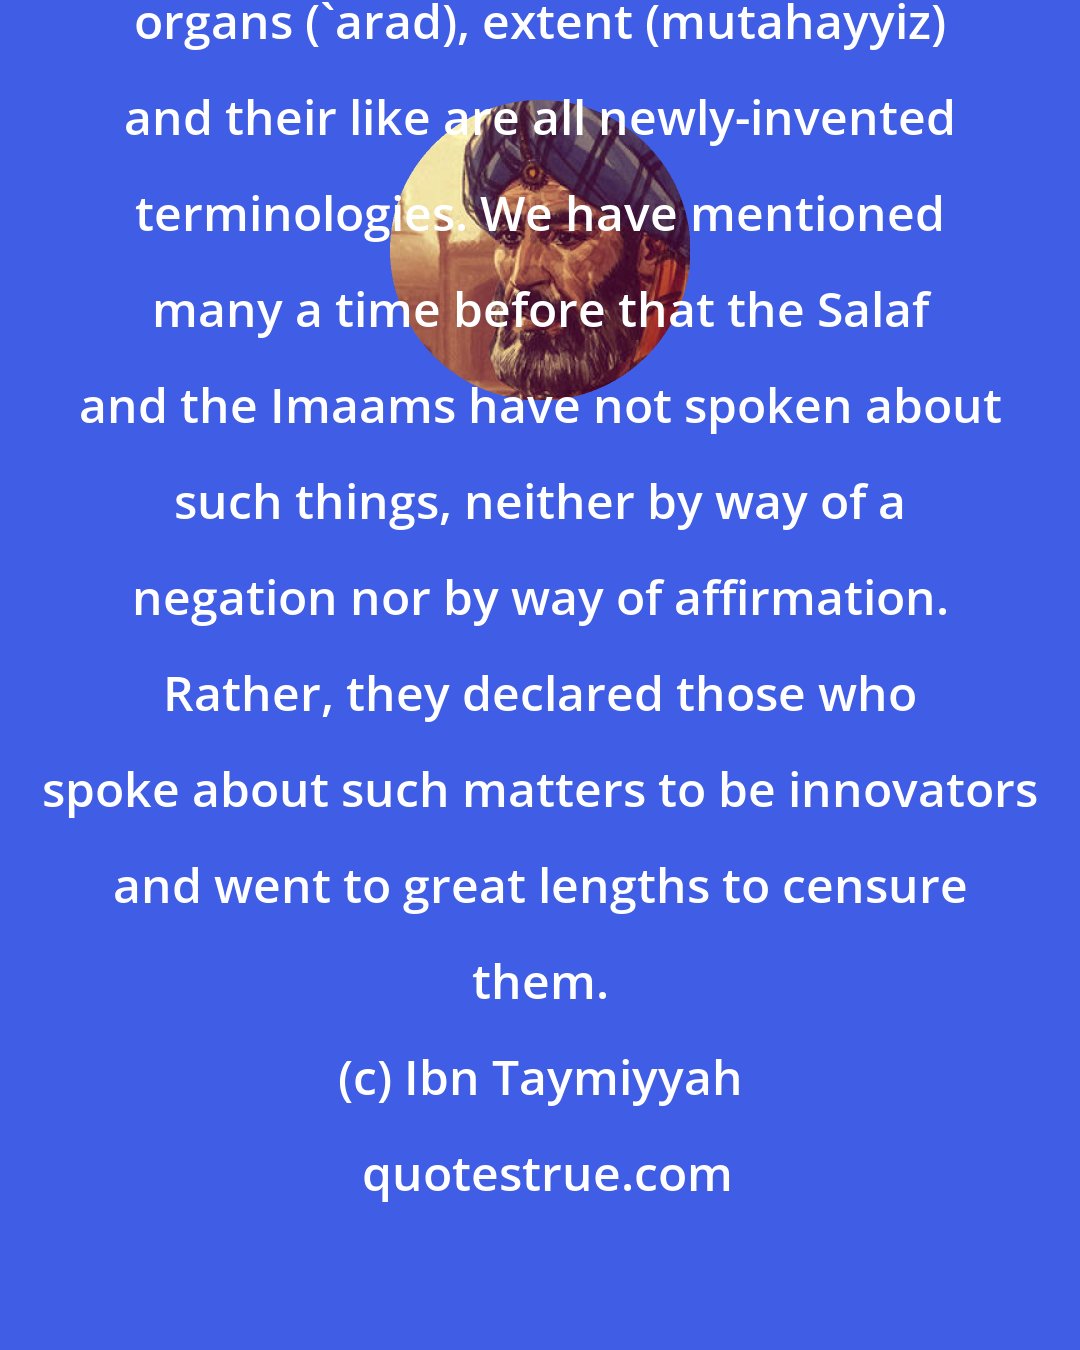 Ibn Taymiyyah: Indeed, the term body (jism), organs ('arad), extent (mutahayyiz) and their like are all newly-invented terminologies. We have mentioned many a time before that the Salaf and the Imaams have not spoken about such things, neither by way of a negation nor by way of affirmation. Rather, they declared those who spoke about such matters to be innovators and went to great lengths to censure them.